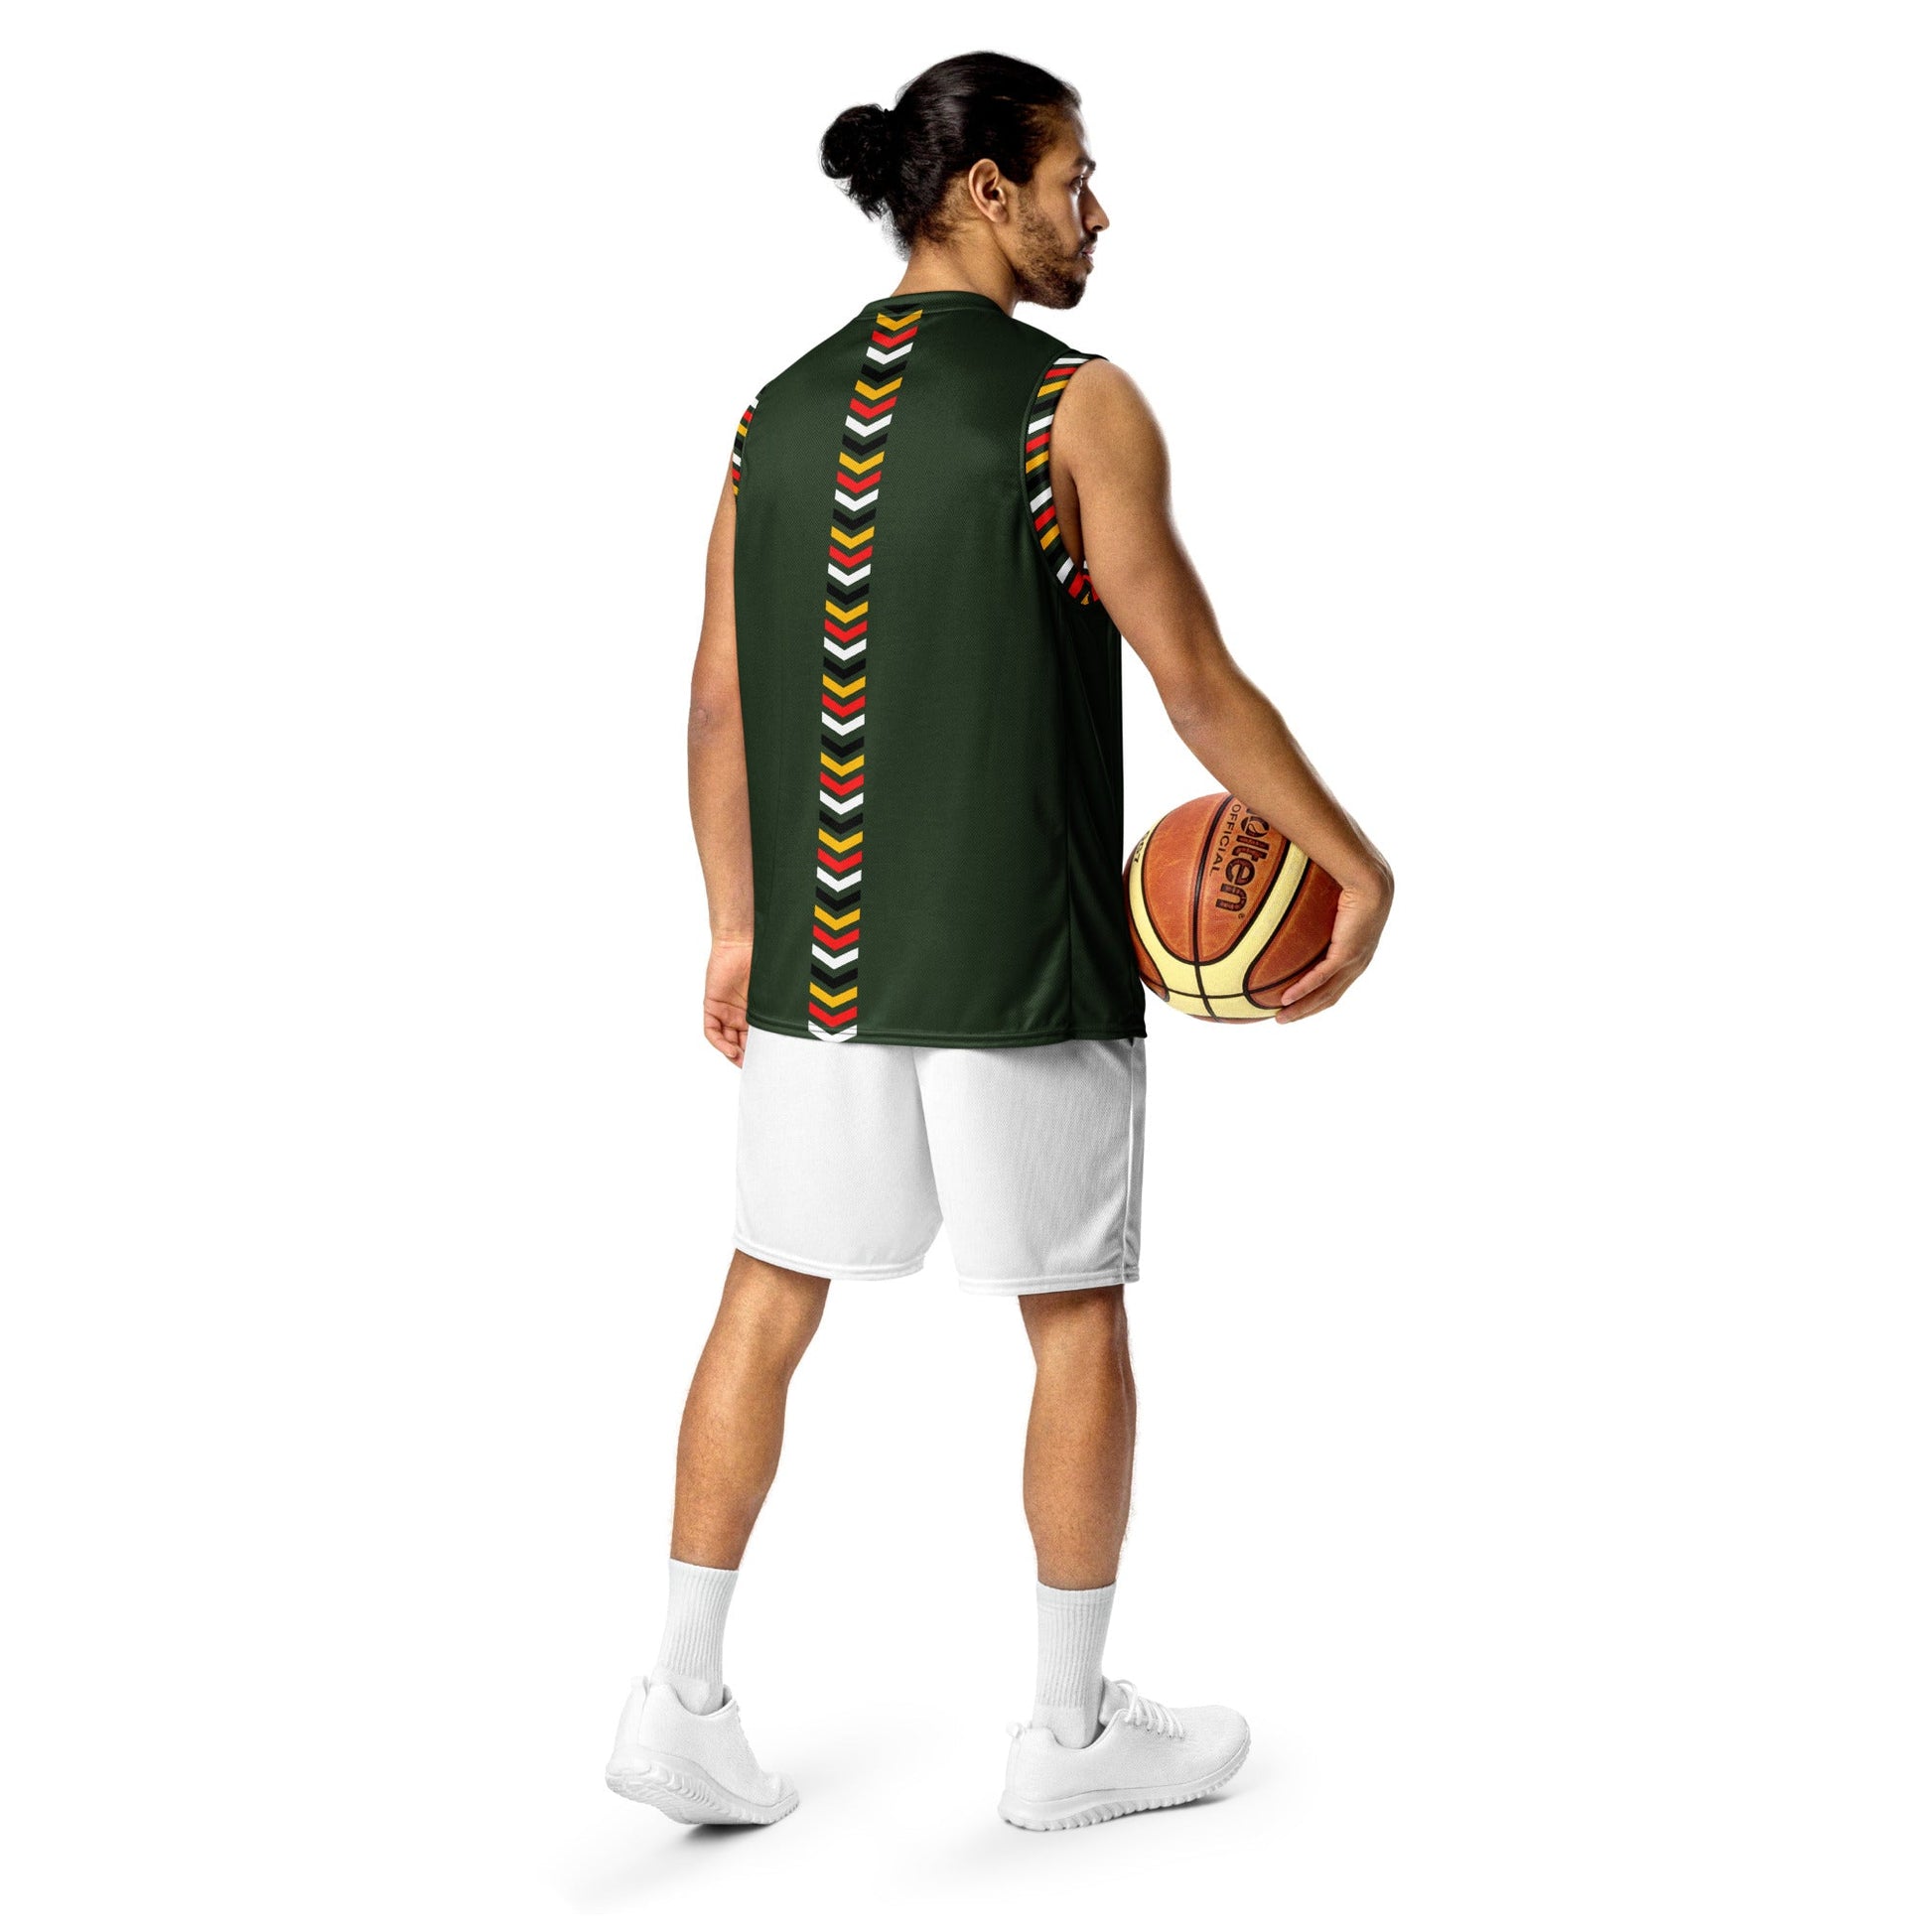 Medicine Wheel Recycled unisex basketball jersey Four Directions - Nikikw Designs